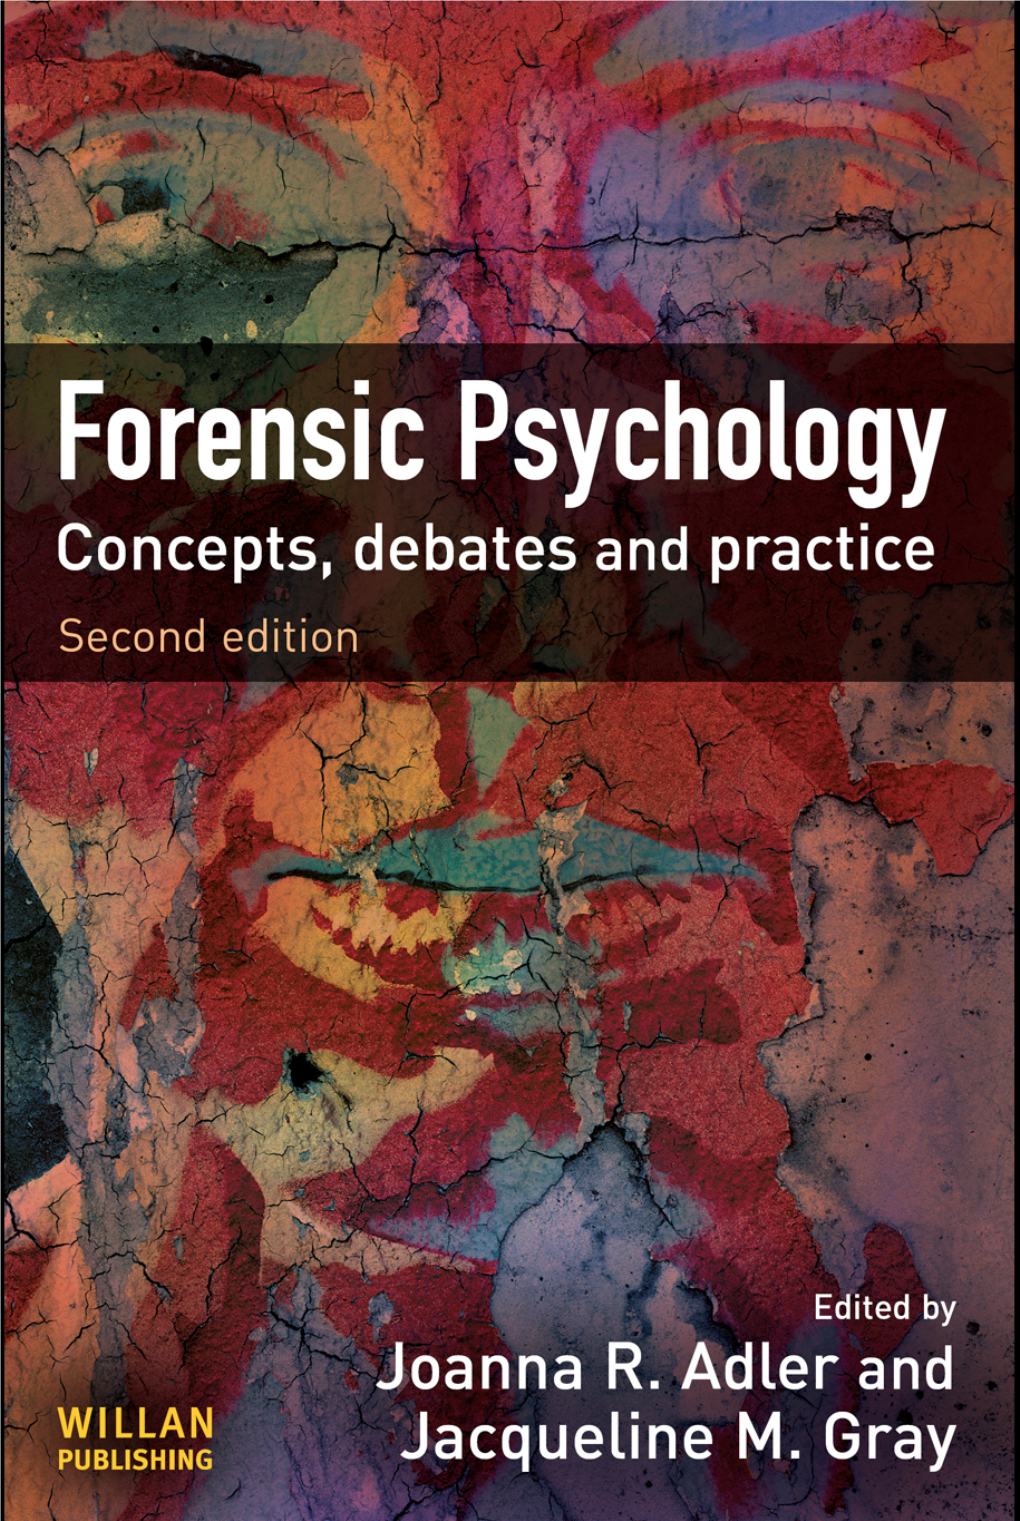 Forensic Psychology: Concepts, Debates and Practice, Second Edition